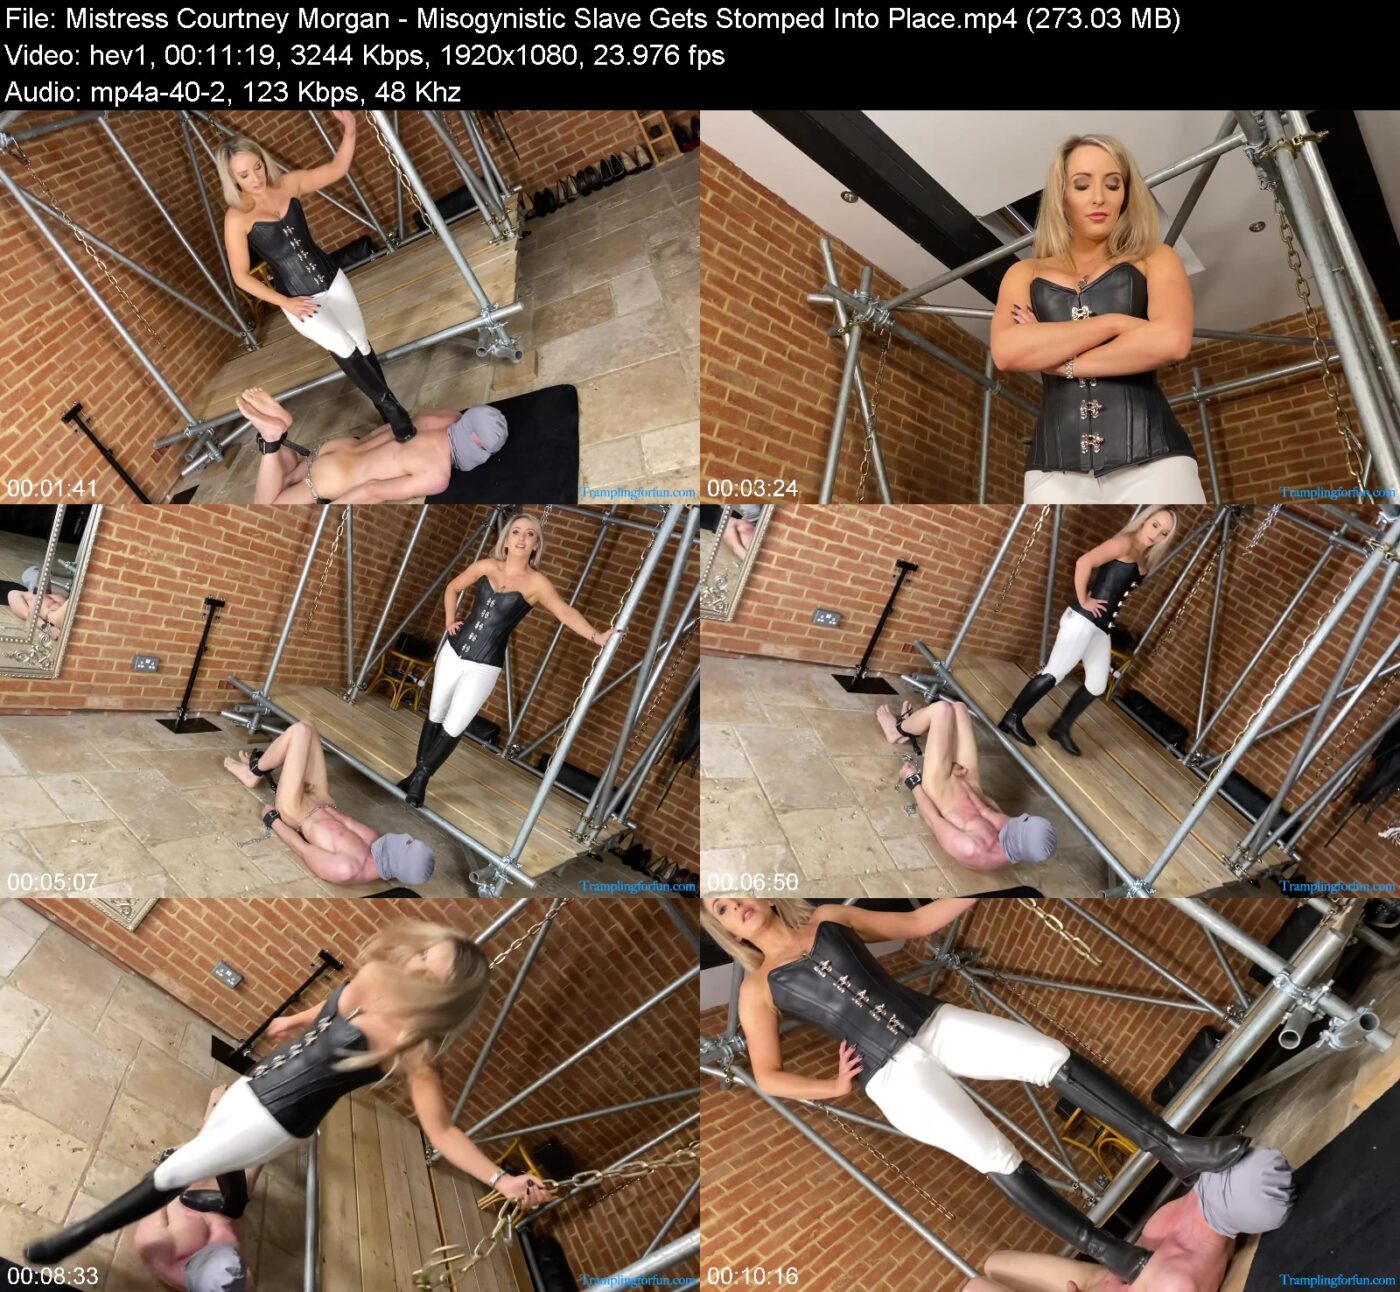 Mistress Courtney Morgan - Misogynistic Slave Gets Stomped Into Place